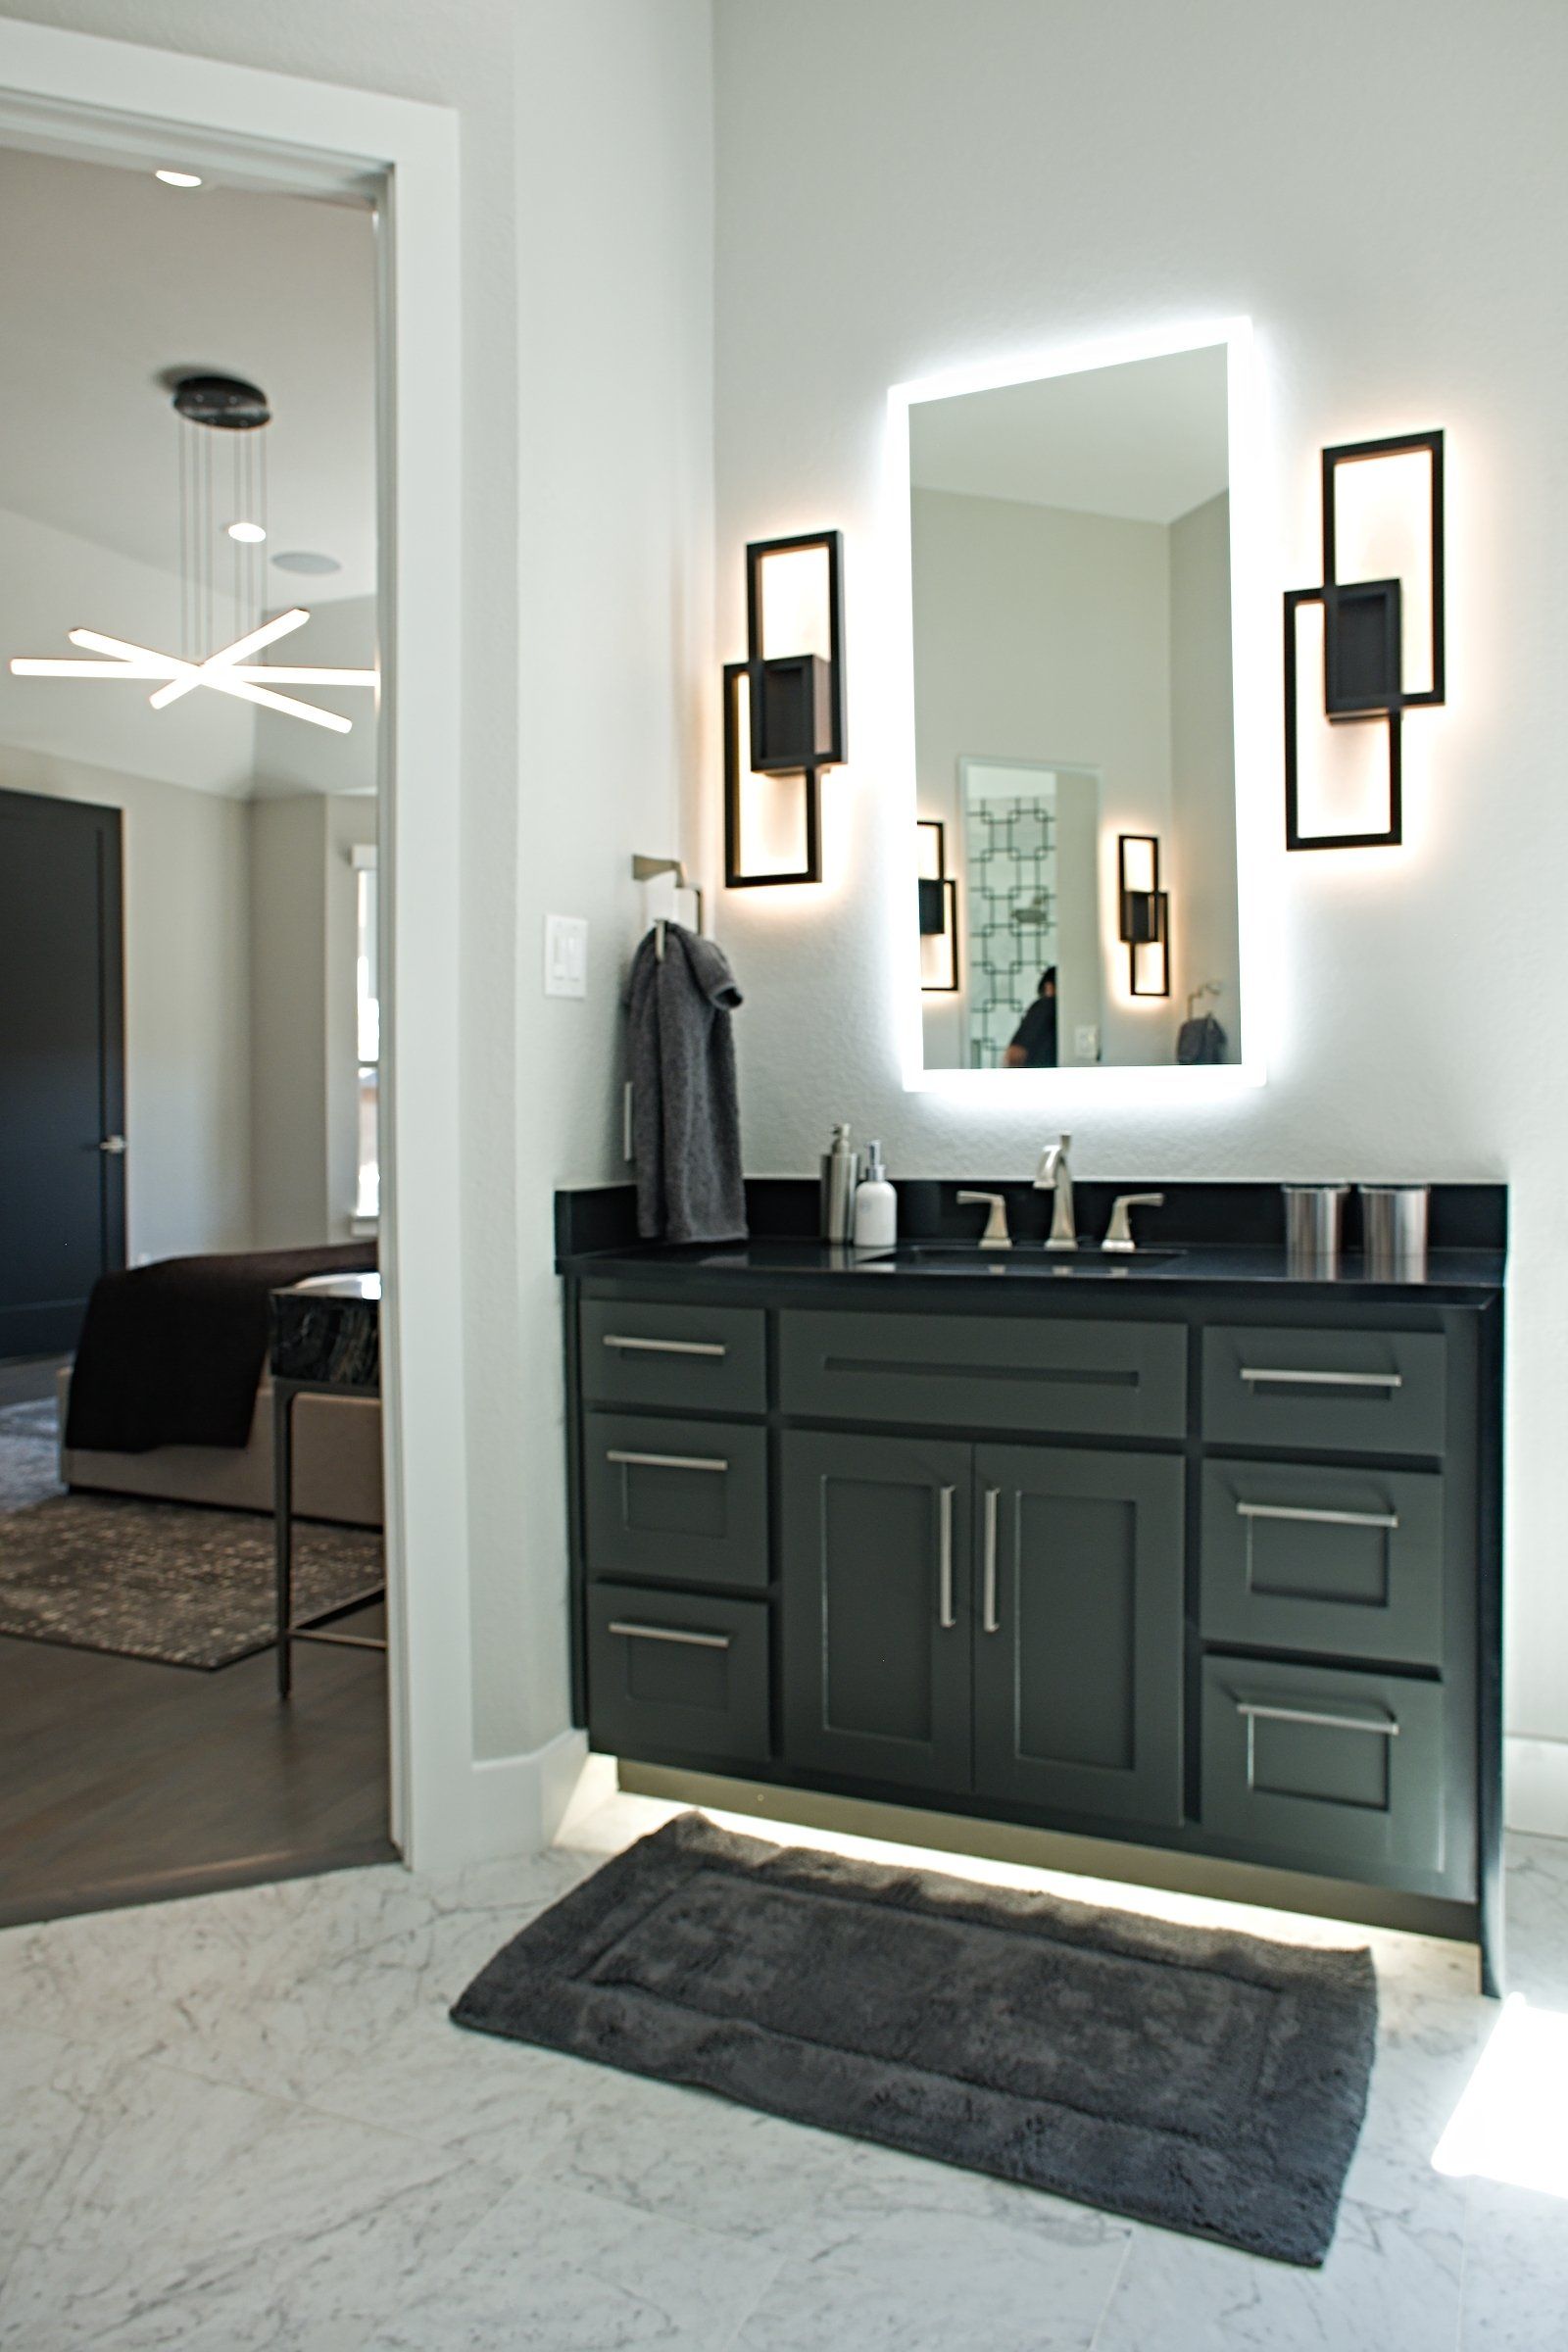 Contemporary, Modern Black and Grey Bathroom with multi-dimensional lighting